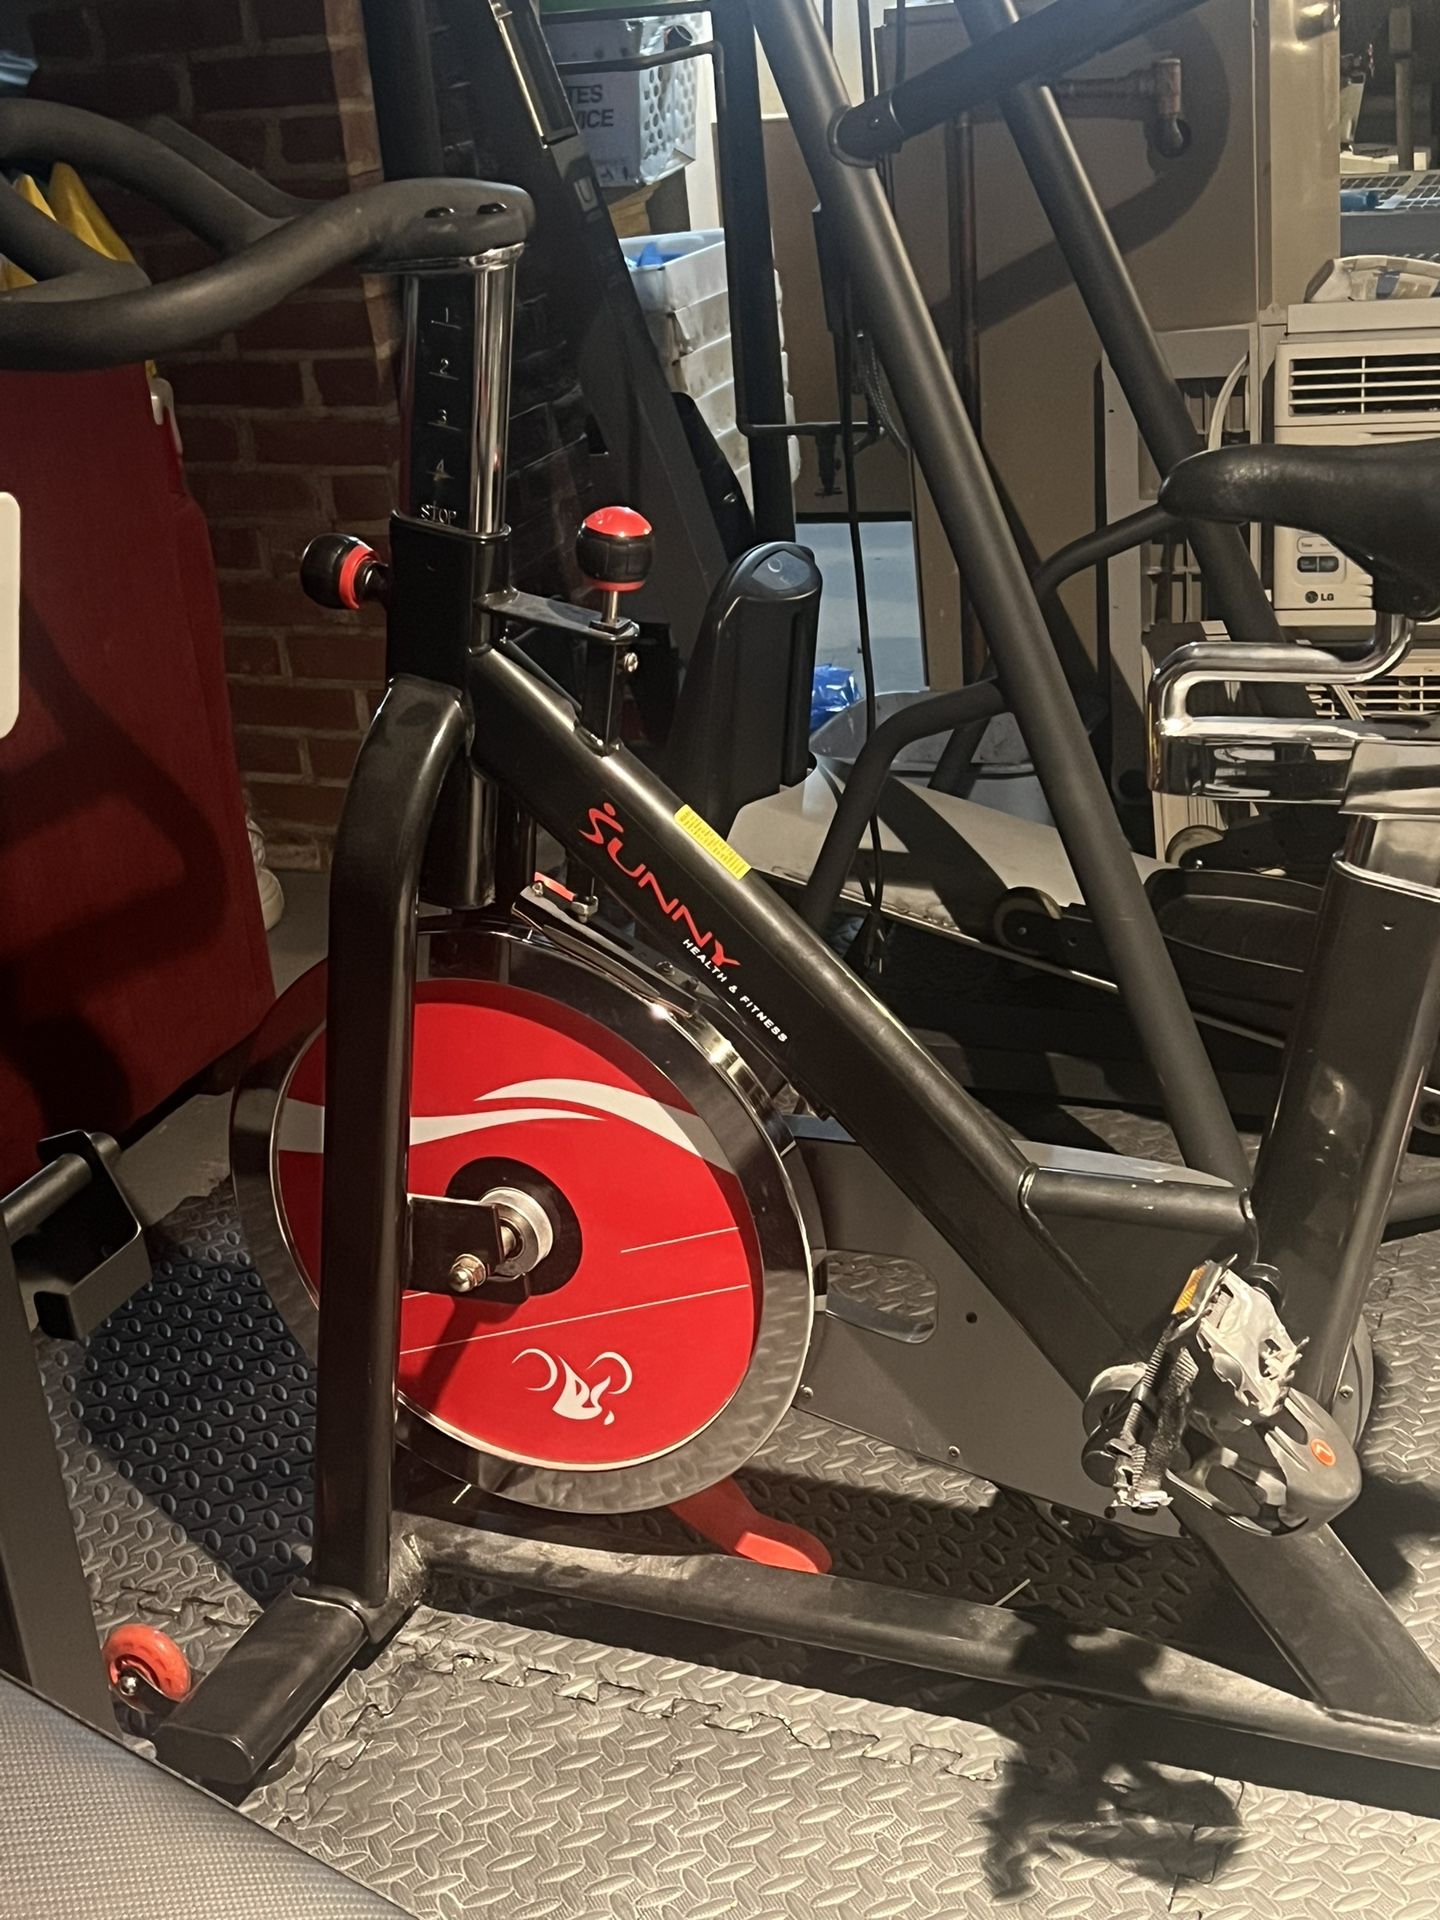 gym equipment in excellent condition